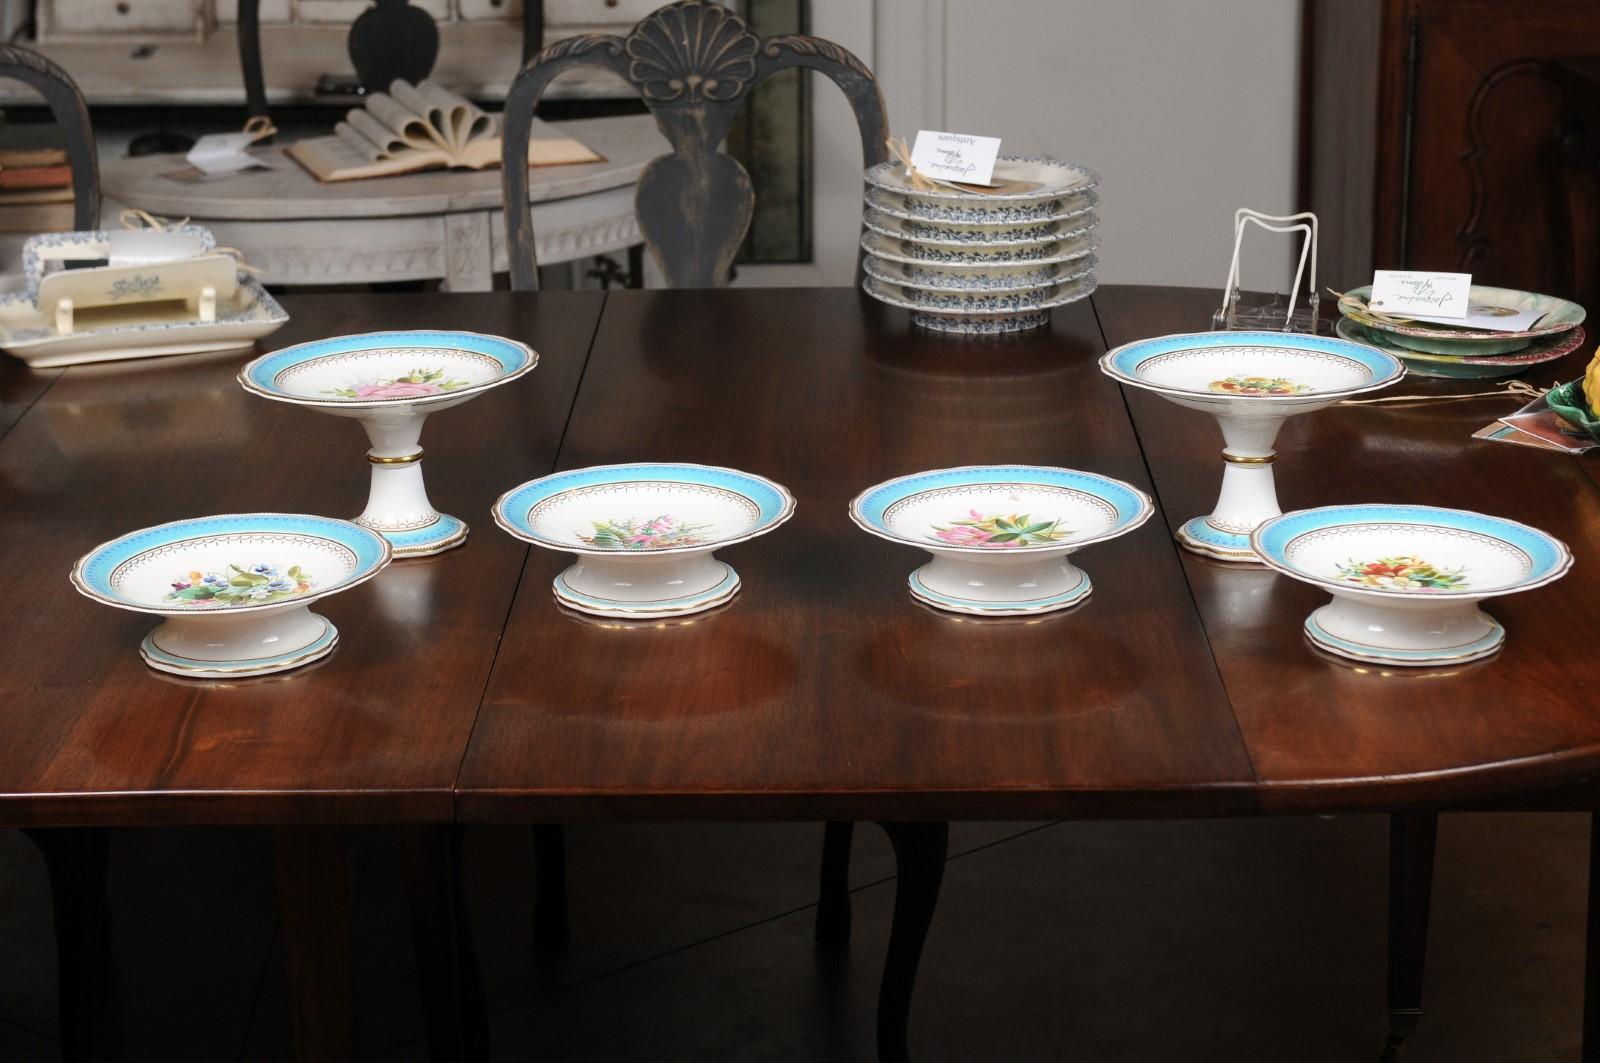 English turquoise and white faience compotes and tall plates from the 19th century, with painted floral decor, priced and sold individually. Born in England during the 19th century, each of these pieces features a turquoise border accented with gilt